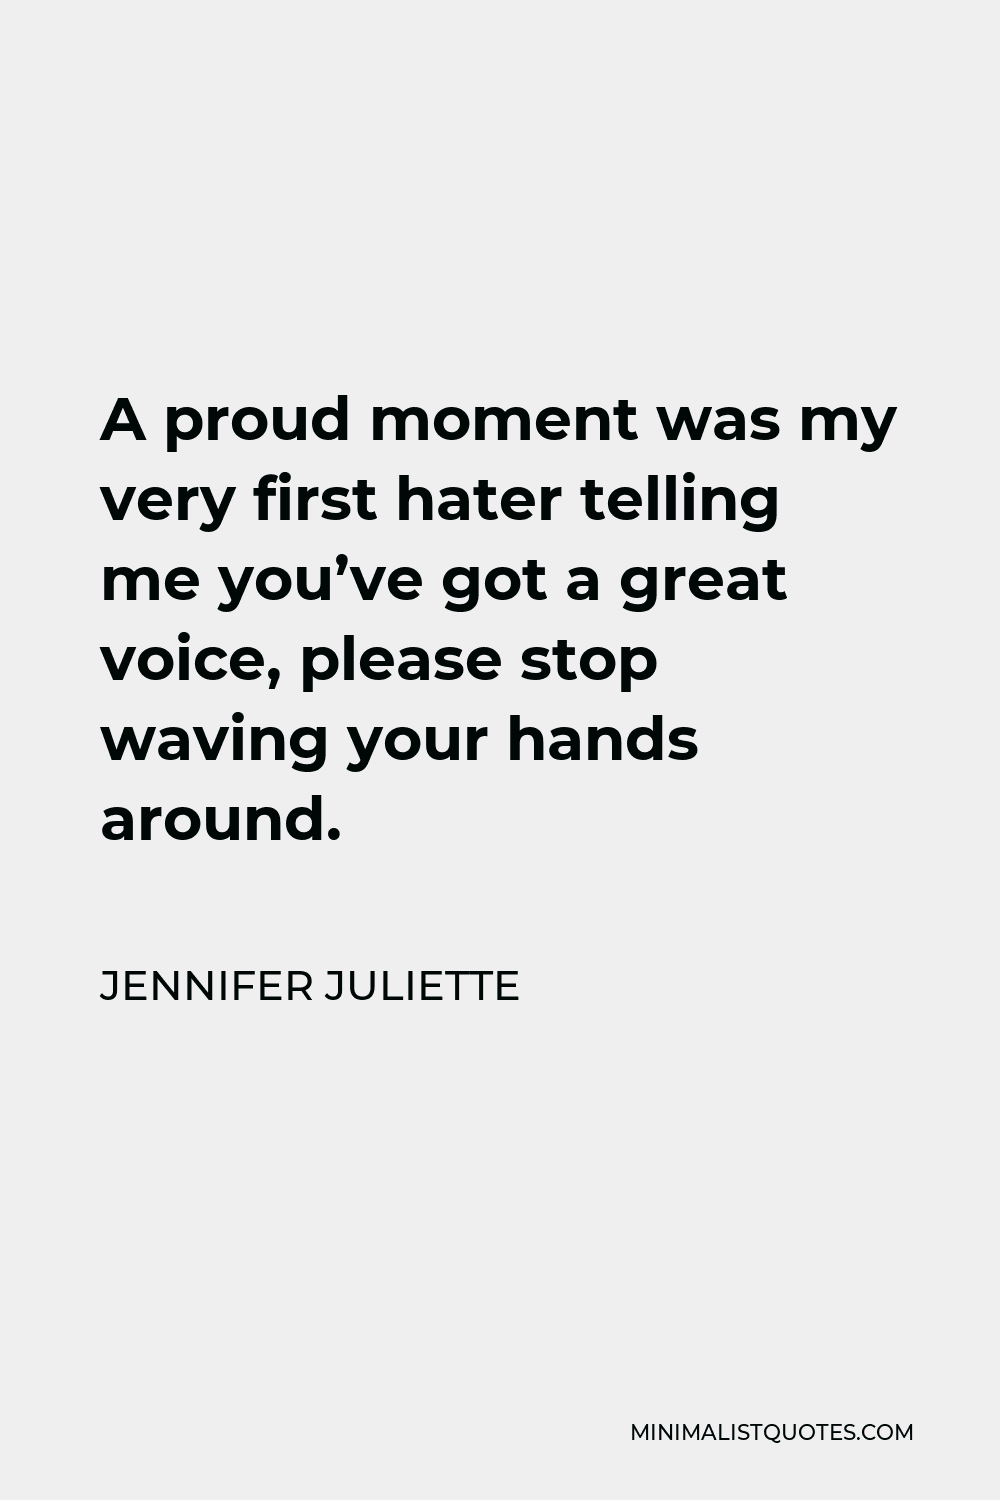 Jennifer Juliette Quote - A proud moment was my very first hater telling me you’ve got a great voice, please stop waving your hands around.